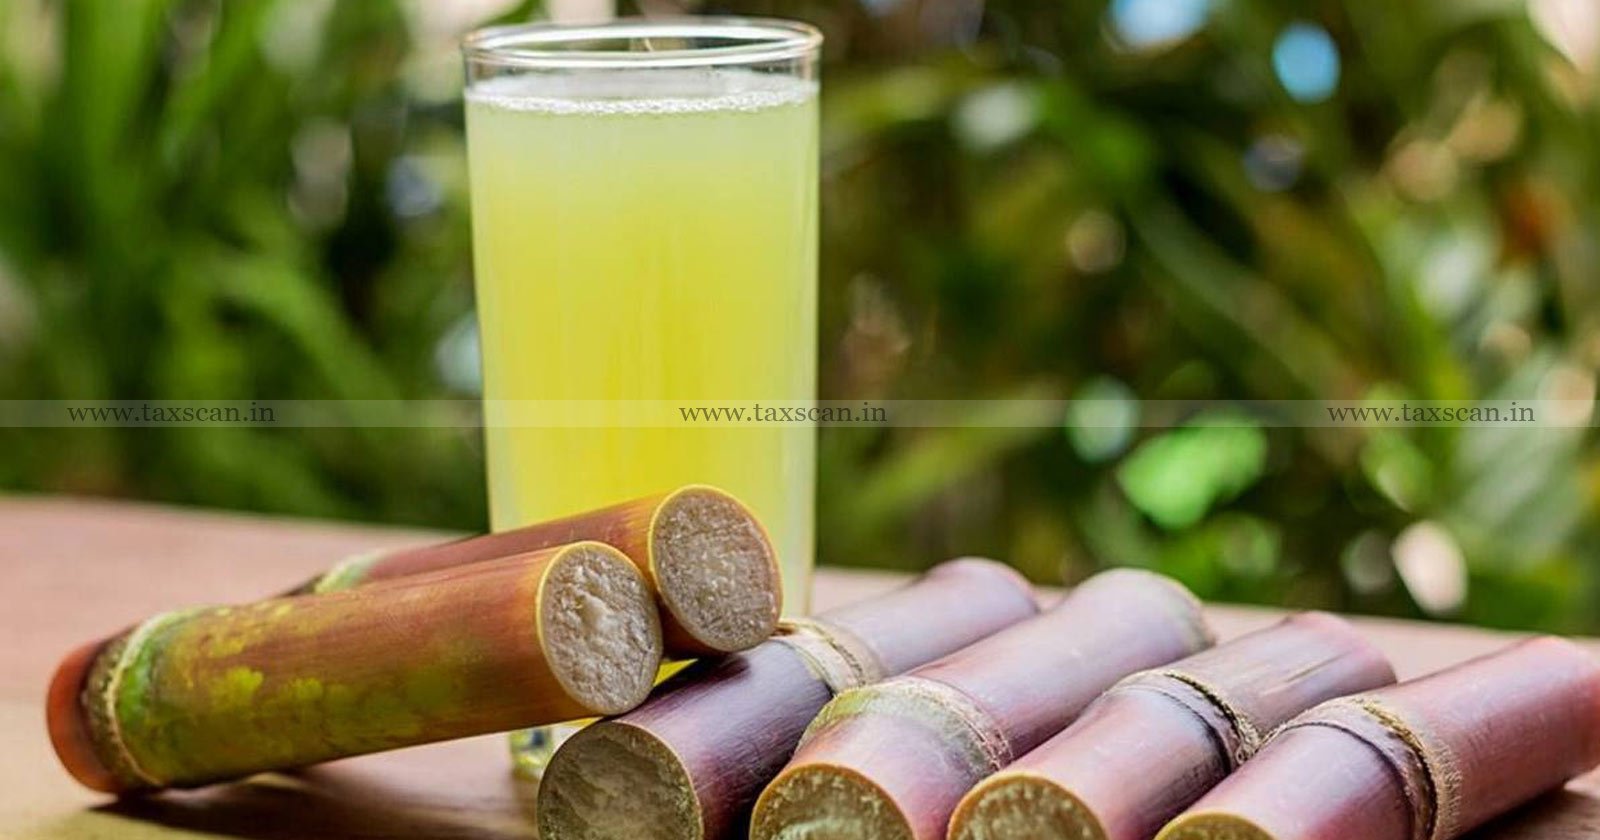 Sugarcane Juice - Sugarcane Juice Attracts - GST - AAR - Authority for Advance Ruling - taxscan